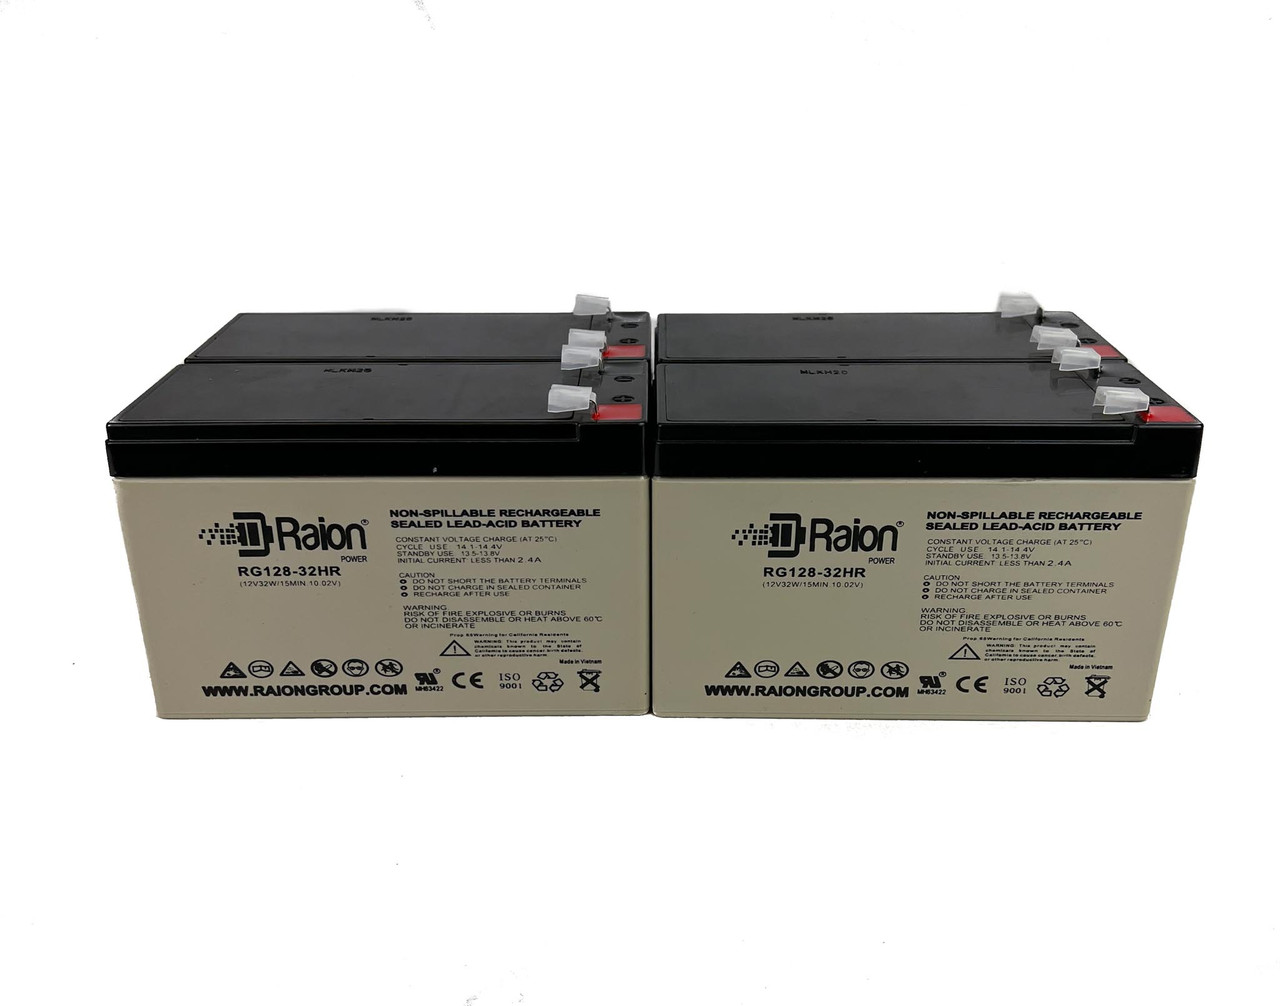 Raion Power 12V 7.5Ah High Rate Discharge UPS Batteries for CyberPower 1500VA CPS1500AVR BB - 4 Pack